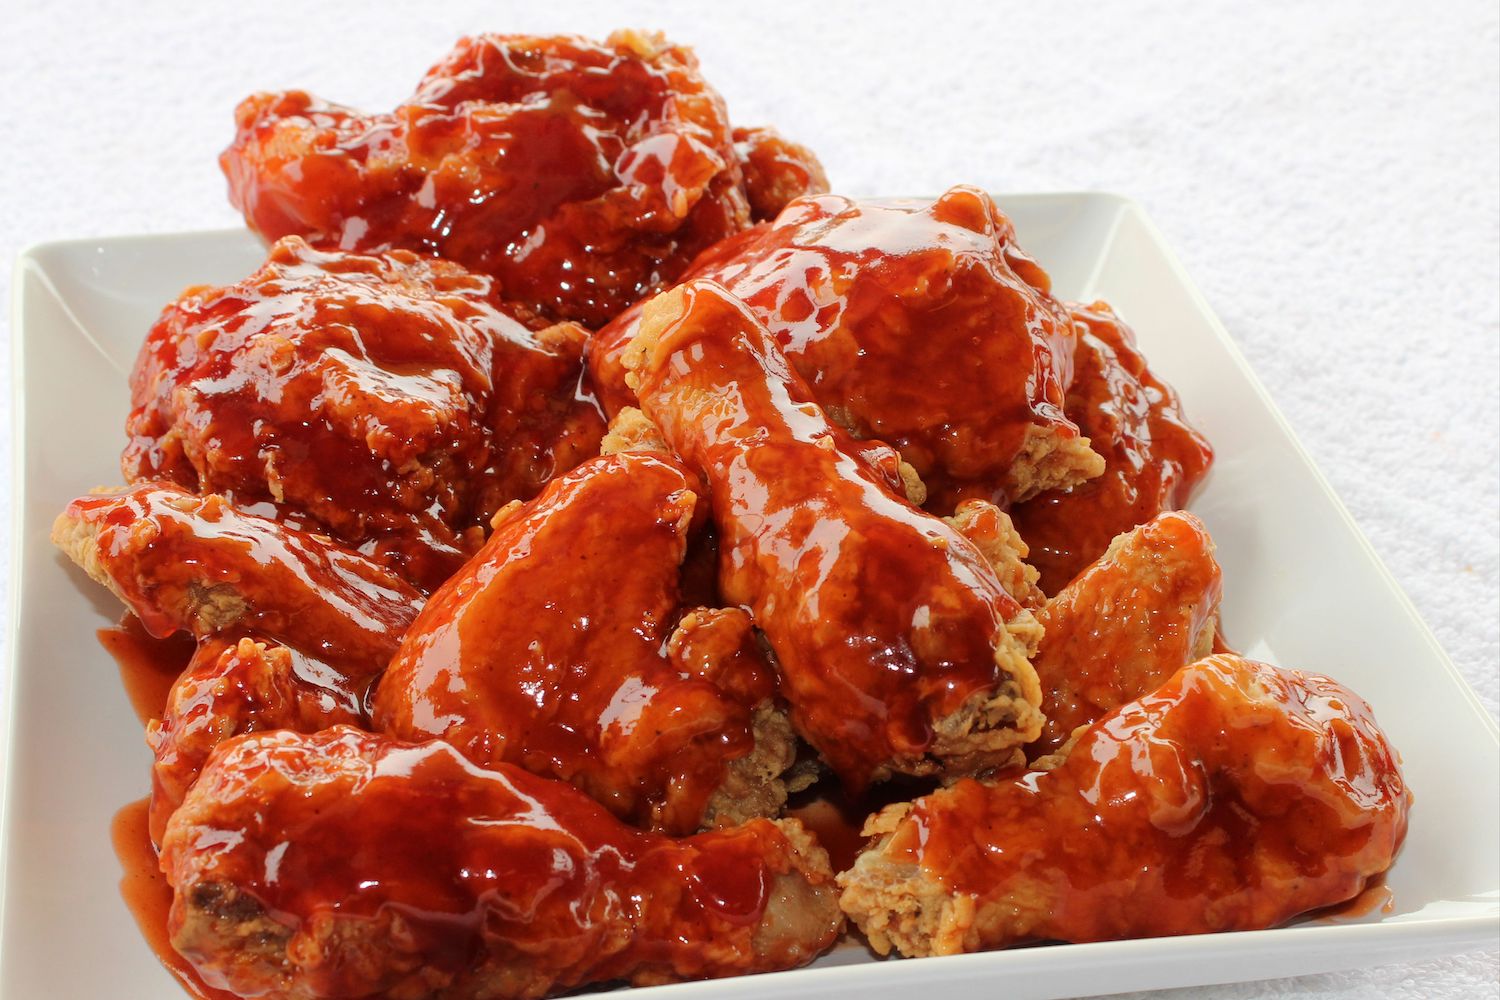 https://www.insidehook.com/wp-content/uploads/2023/02/uncle-remus-fried-chicken-with-mild-sauce.jpeg?fit=1500%2C1000